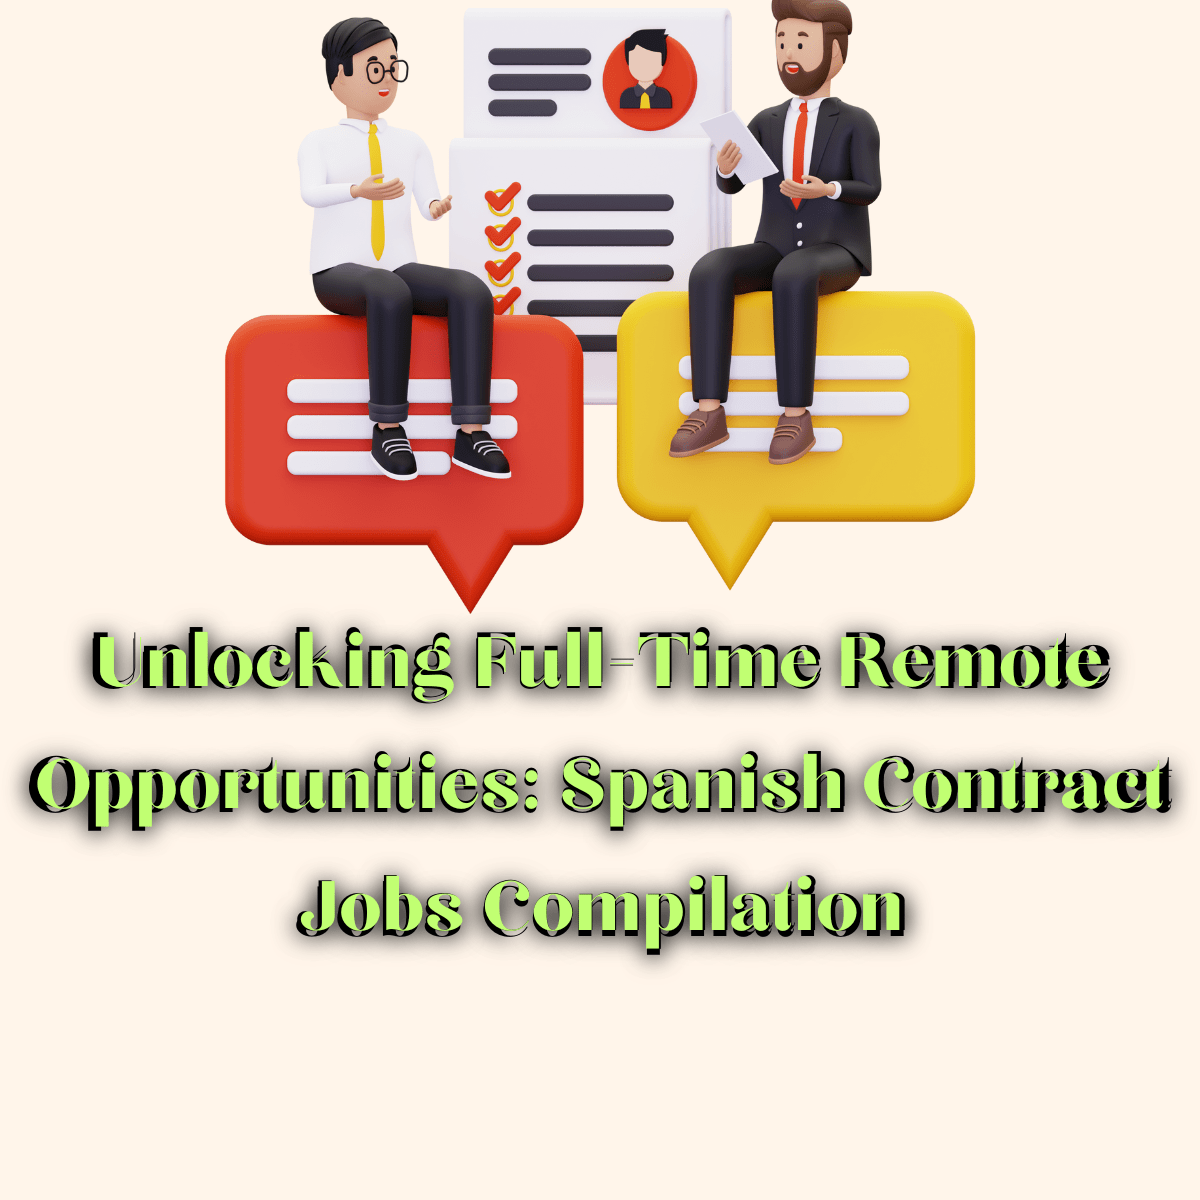 Unlocking Full-Time Remote Opportunities: Spanish Contract Jobs Compilation